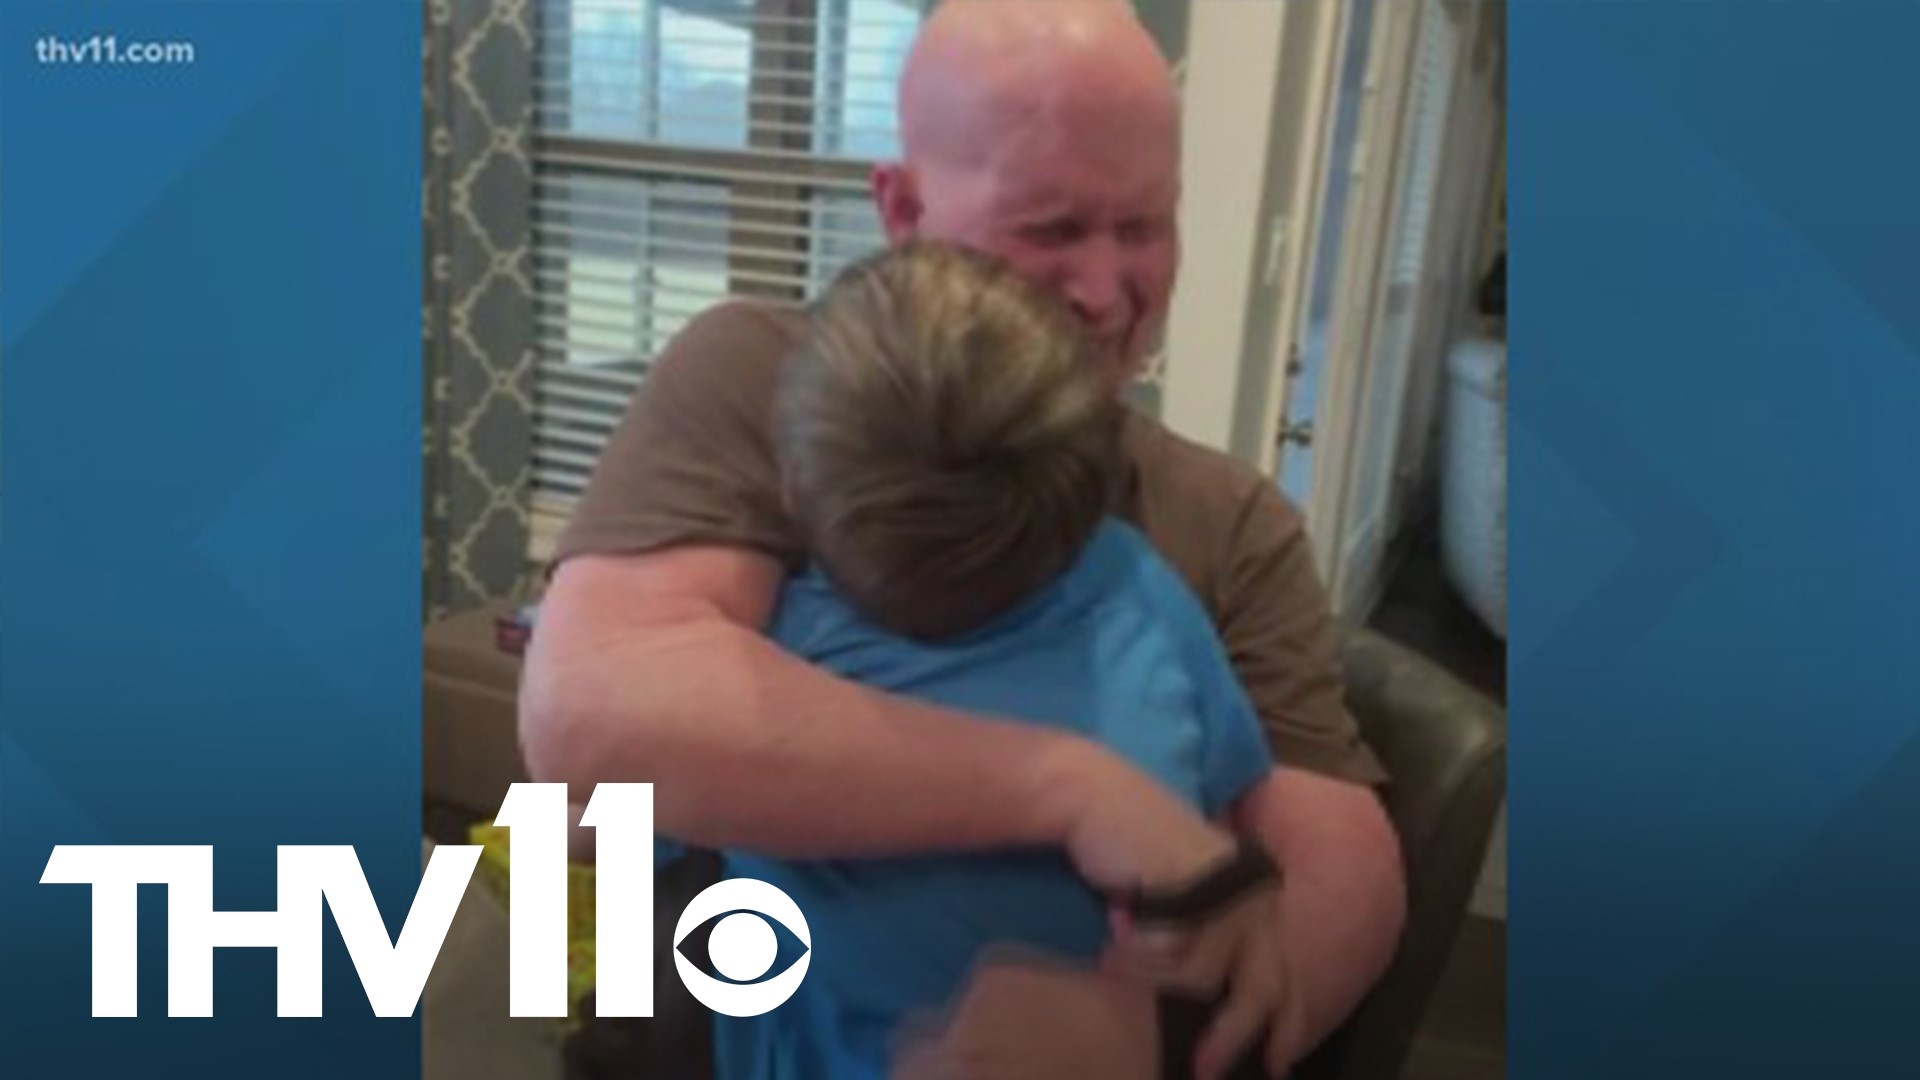 An Arkansas man was able to hug his grandsons for the first time in 8 years, all thanks to a new tool developed by students at Arkansas State University.